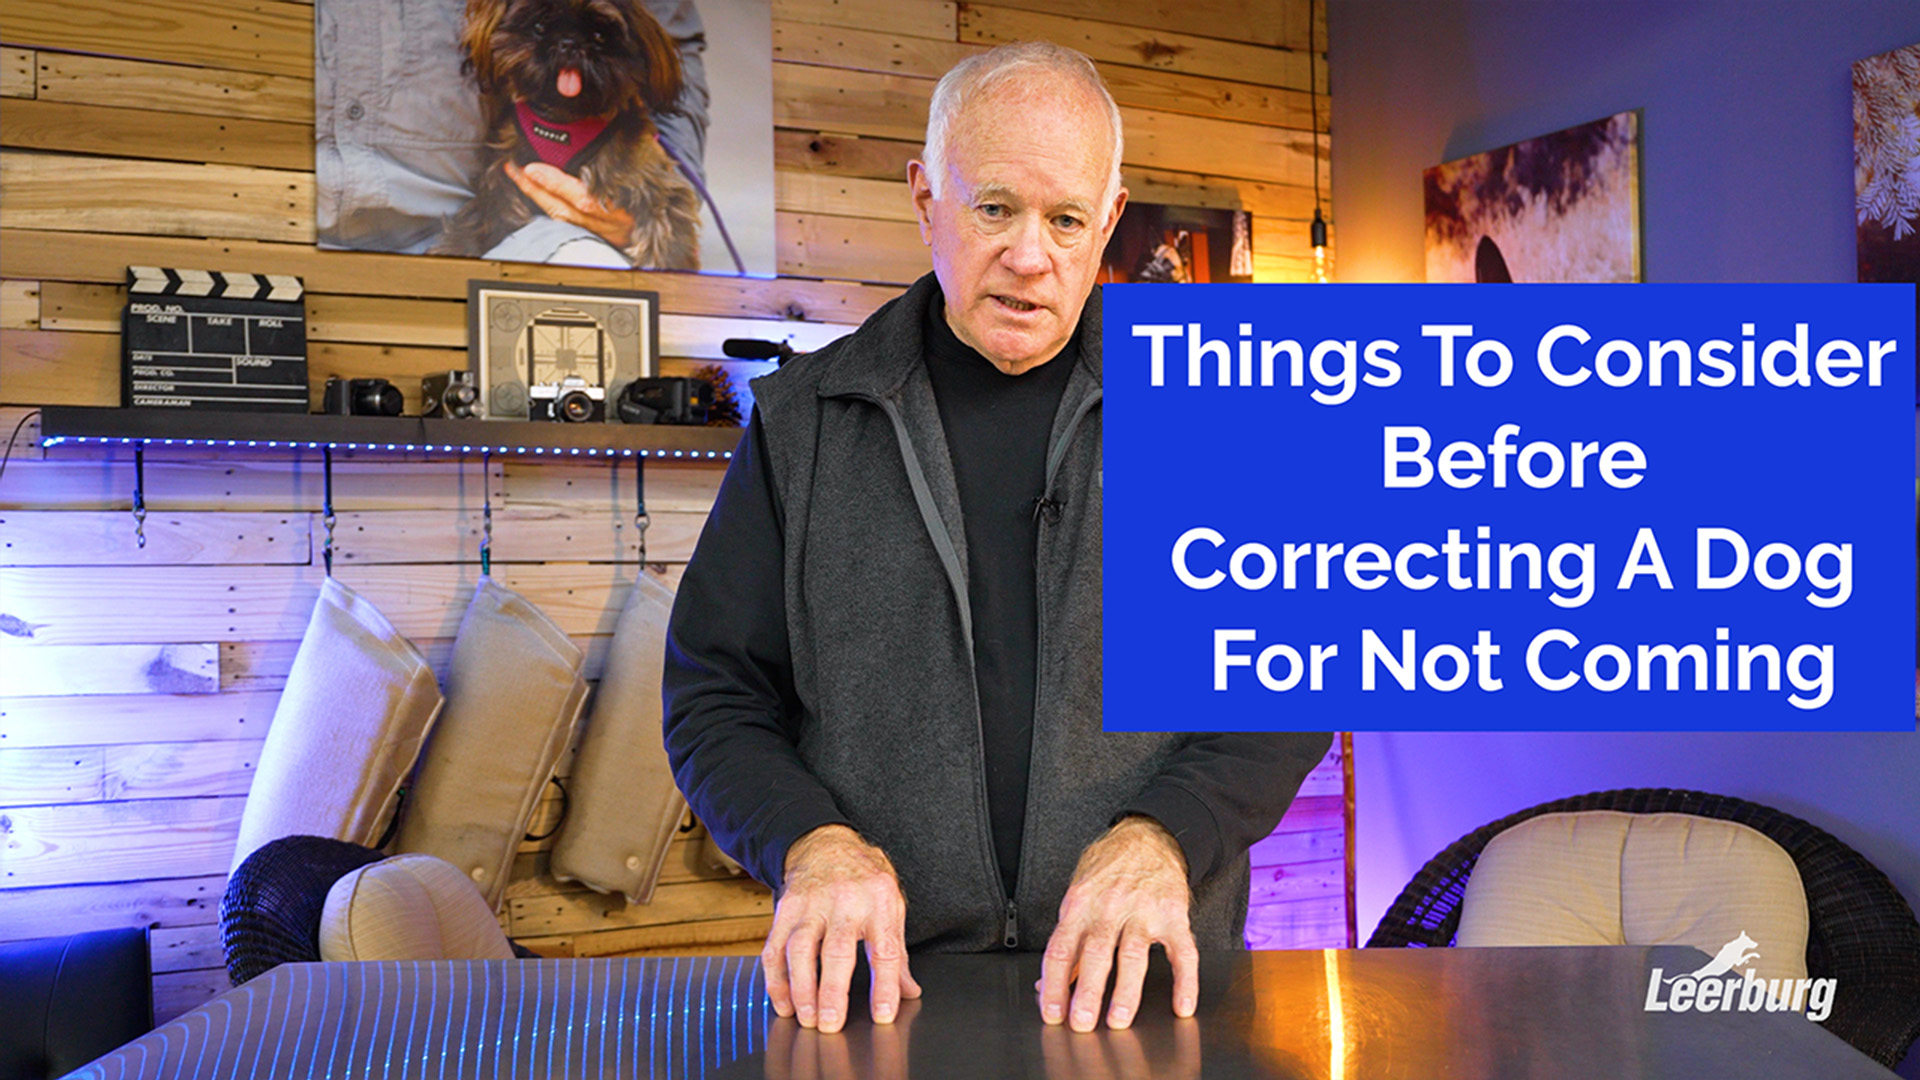 Things To Consider Before Correcting A Dog For Not Coming